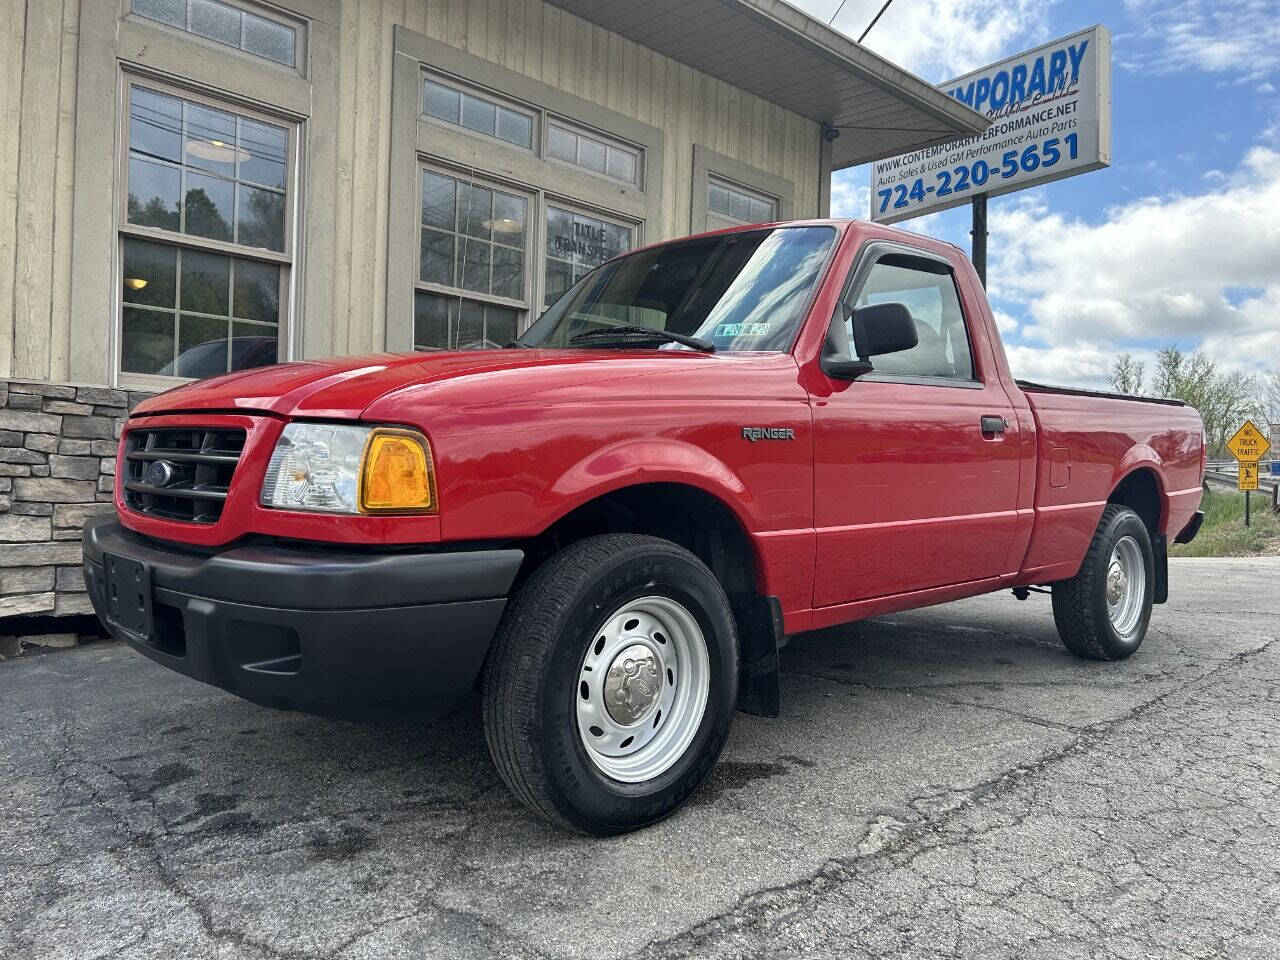 2001 Ford Ranger For Sale In Ruffs Dale, PA - Carsforsale.com®